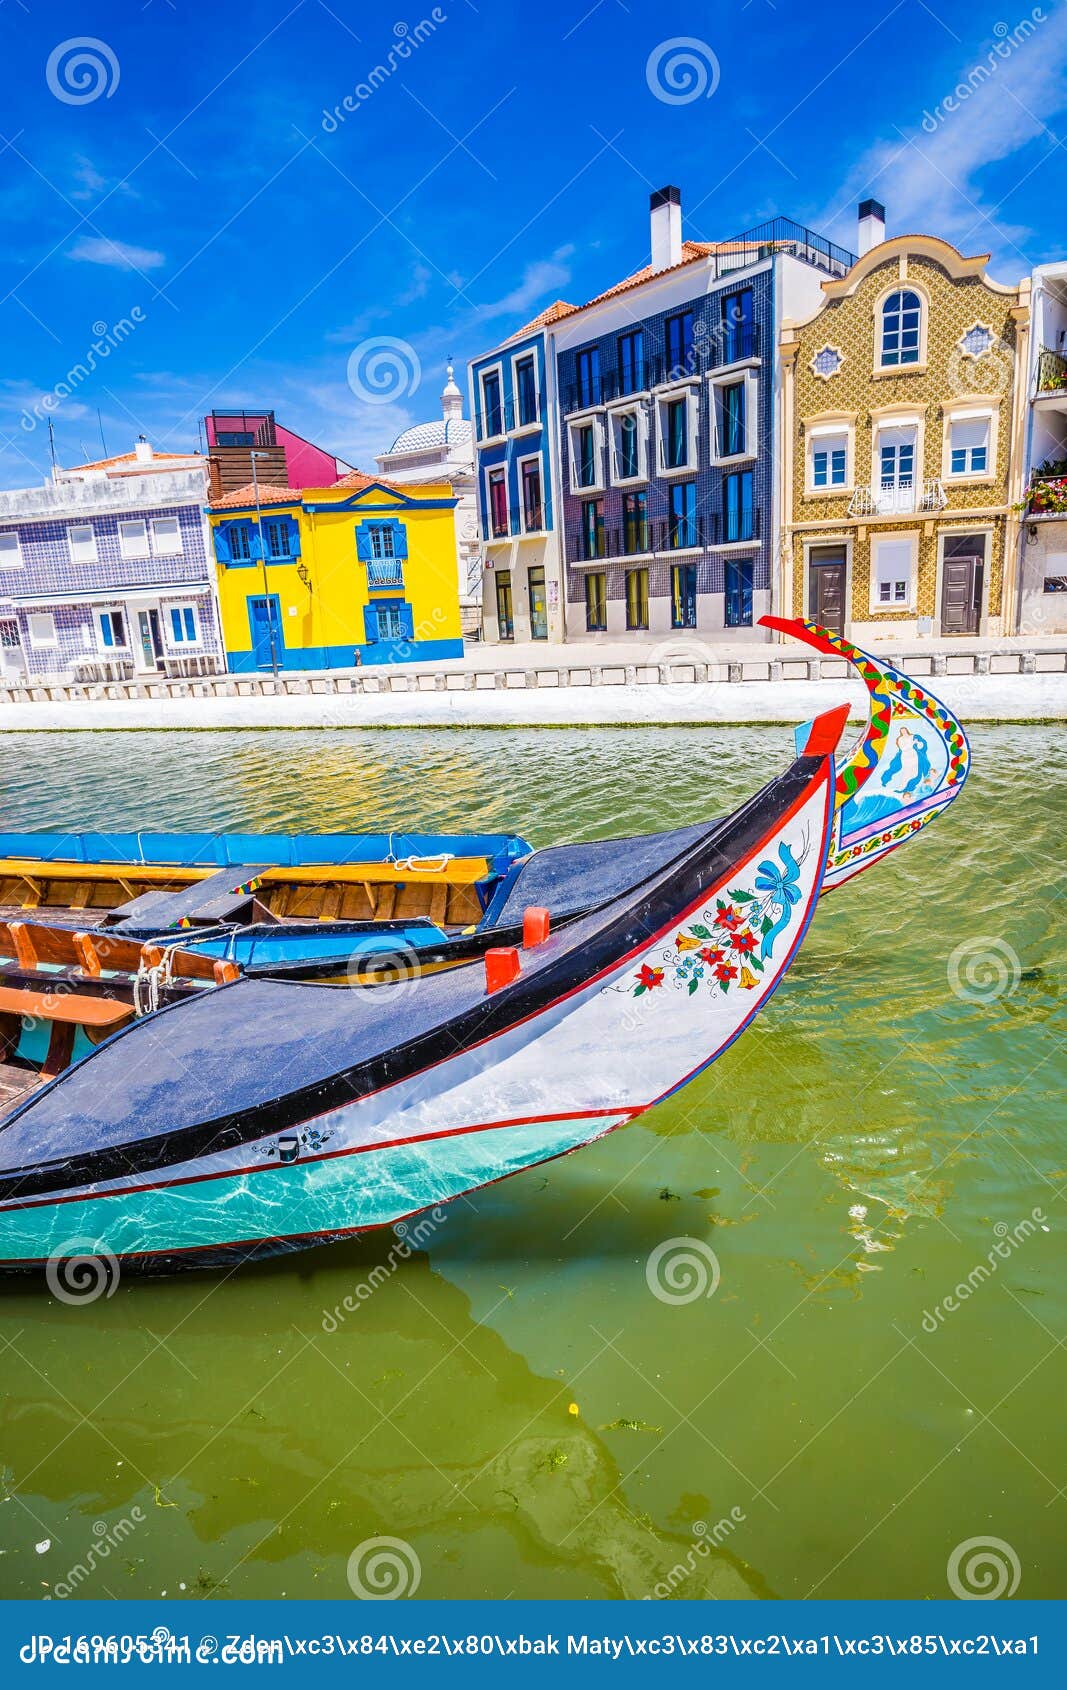 colorful buildings and boats - aveiro, portugal